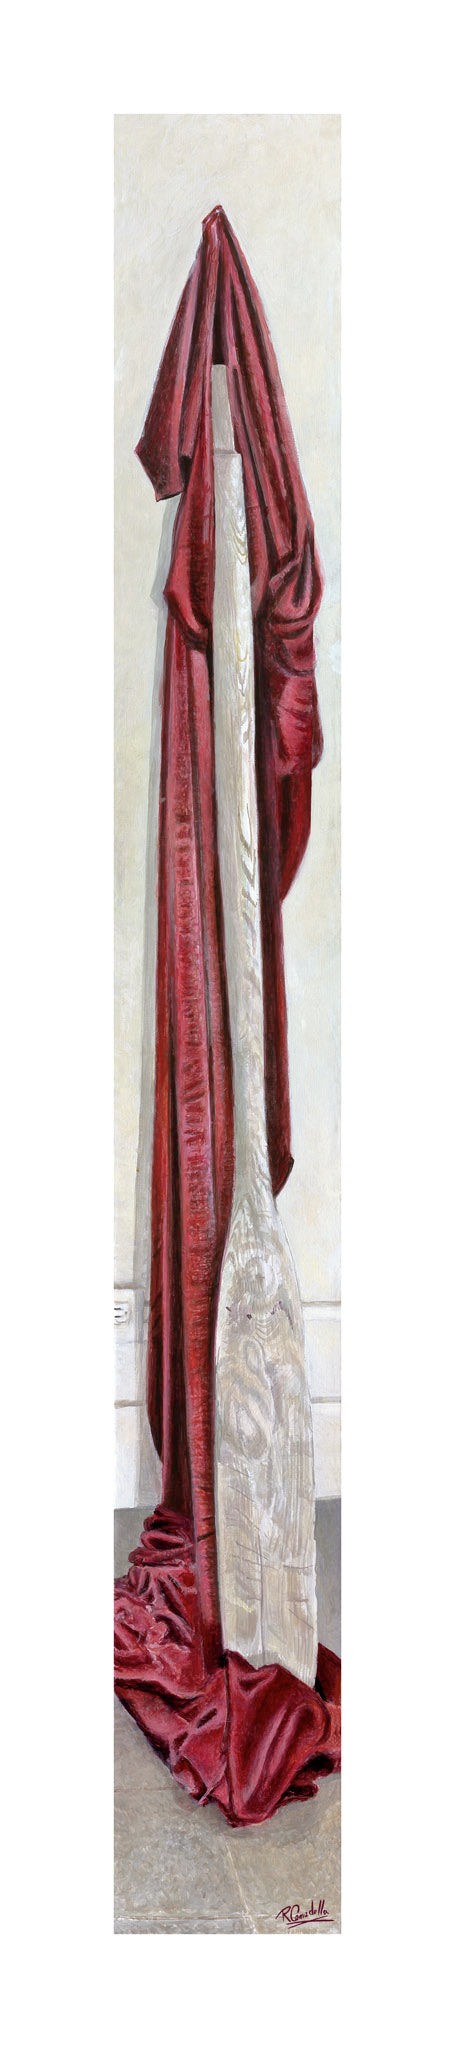 Oar with Red Cloth